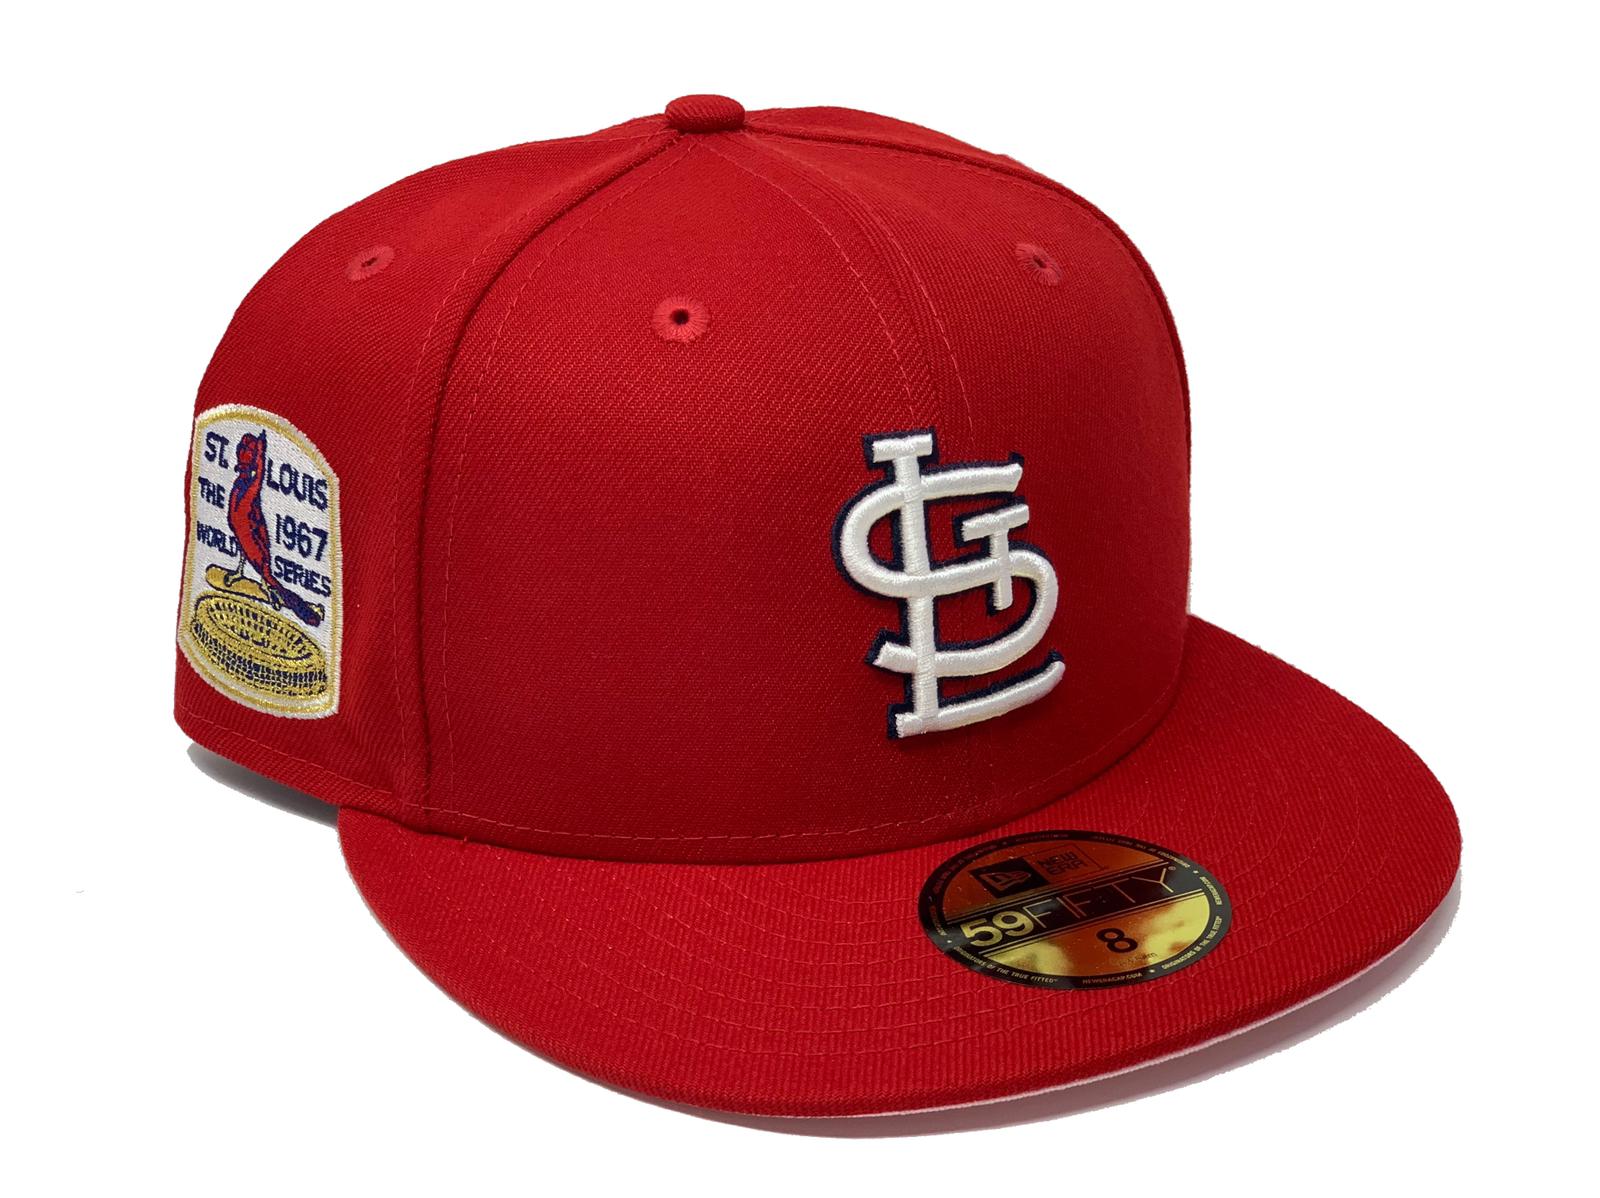 ST. LOUIS CARDINALS 1967 WORLD SERIES RED ICY BRIM NEW ERA FITTED HAT –  Sports World 165